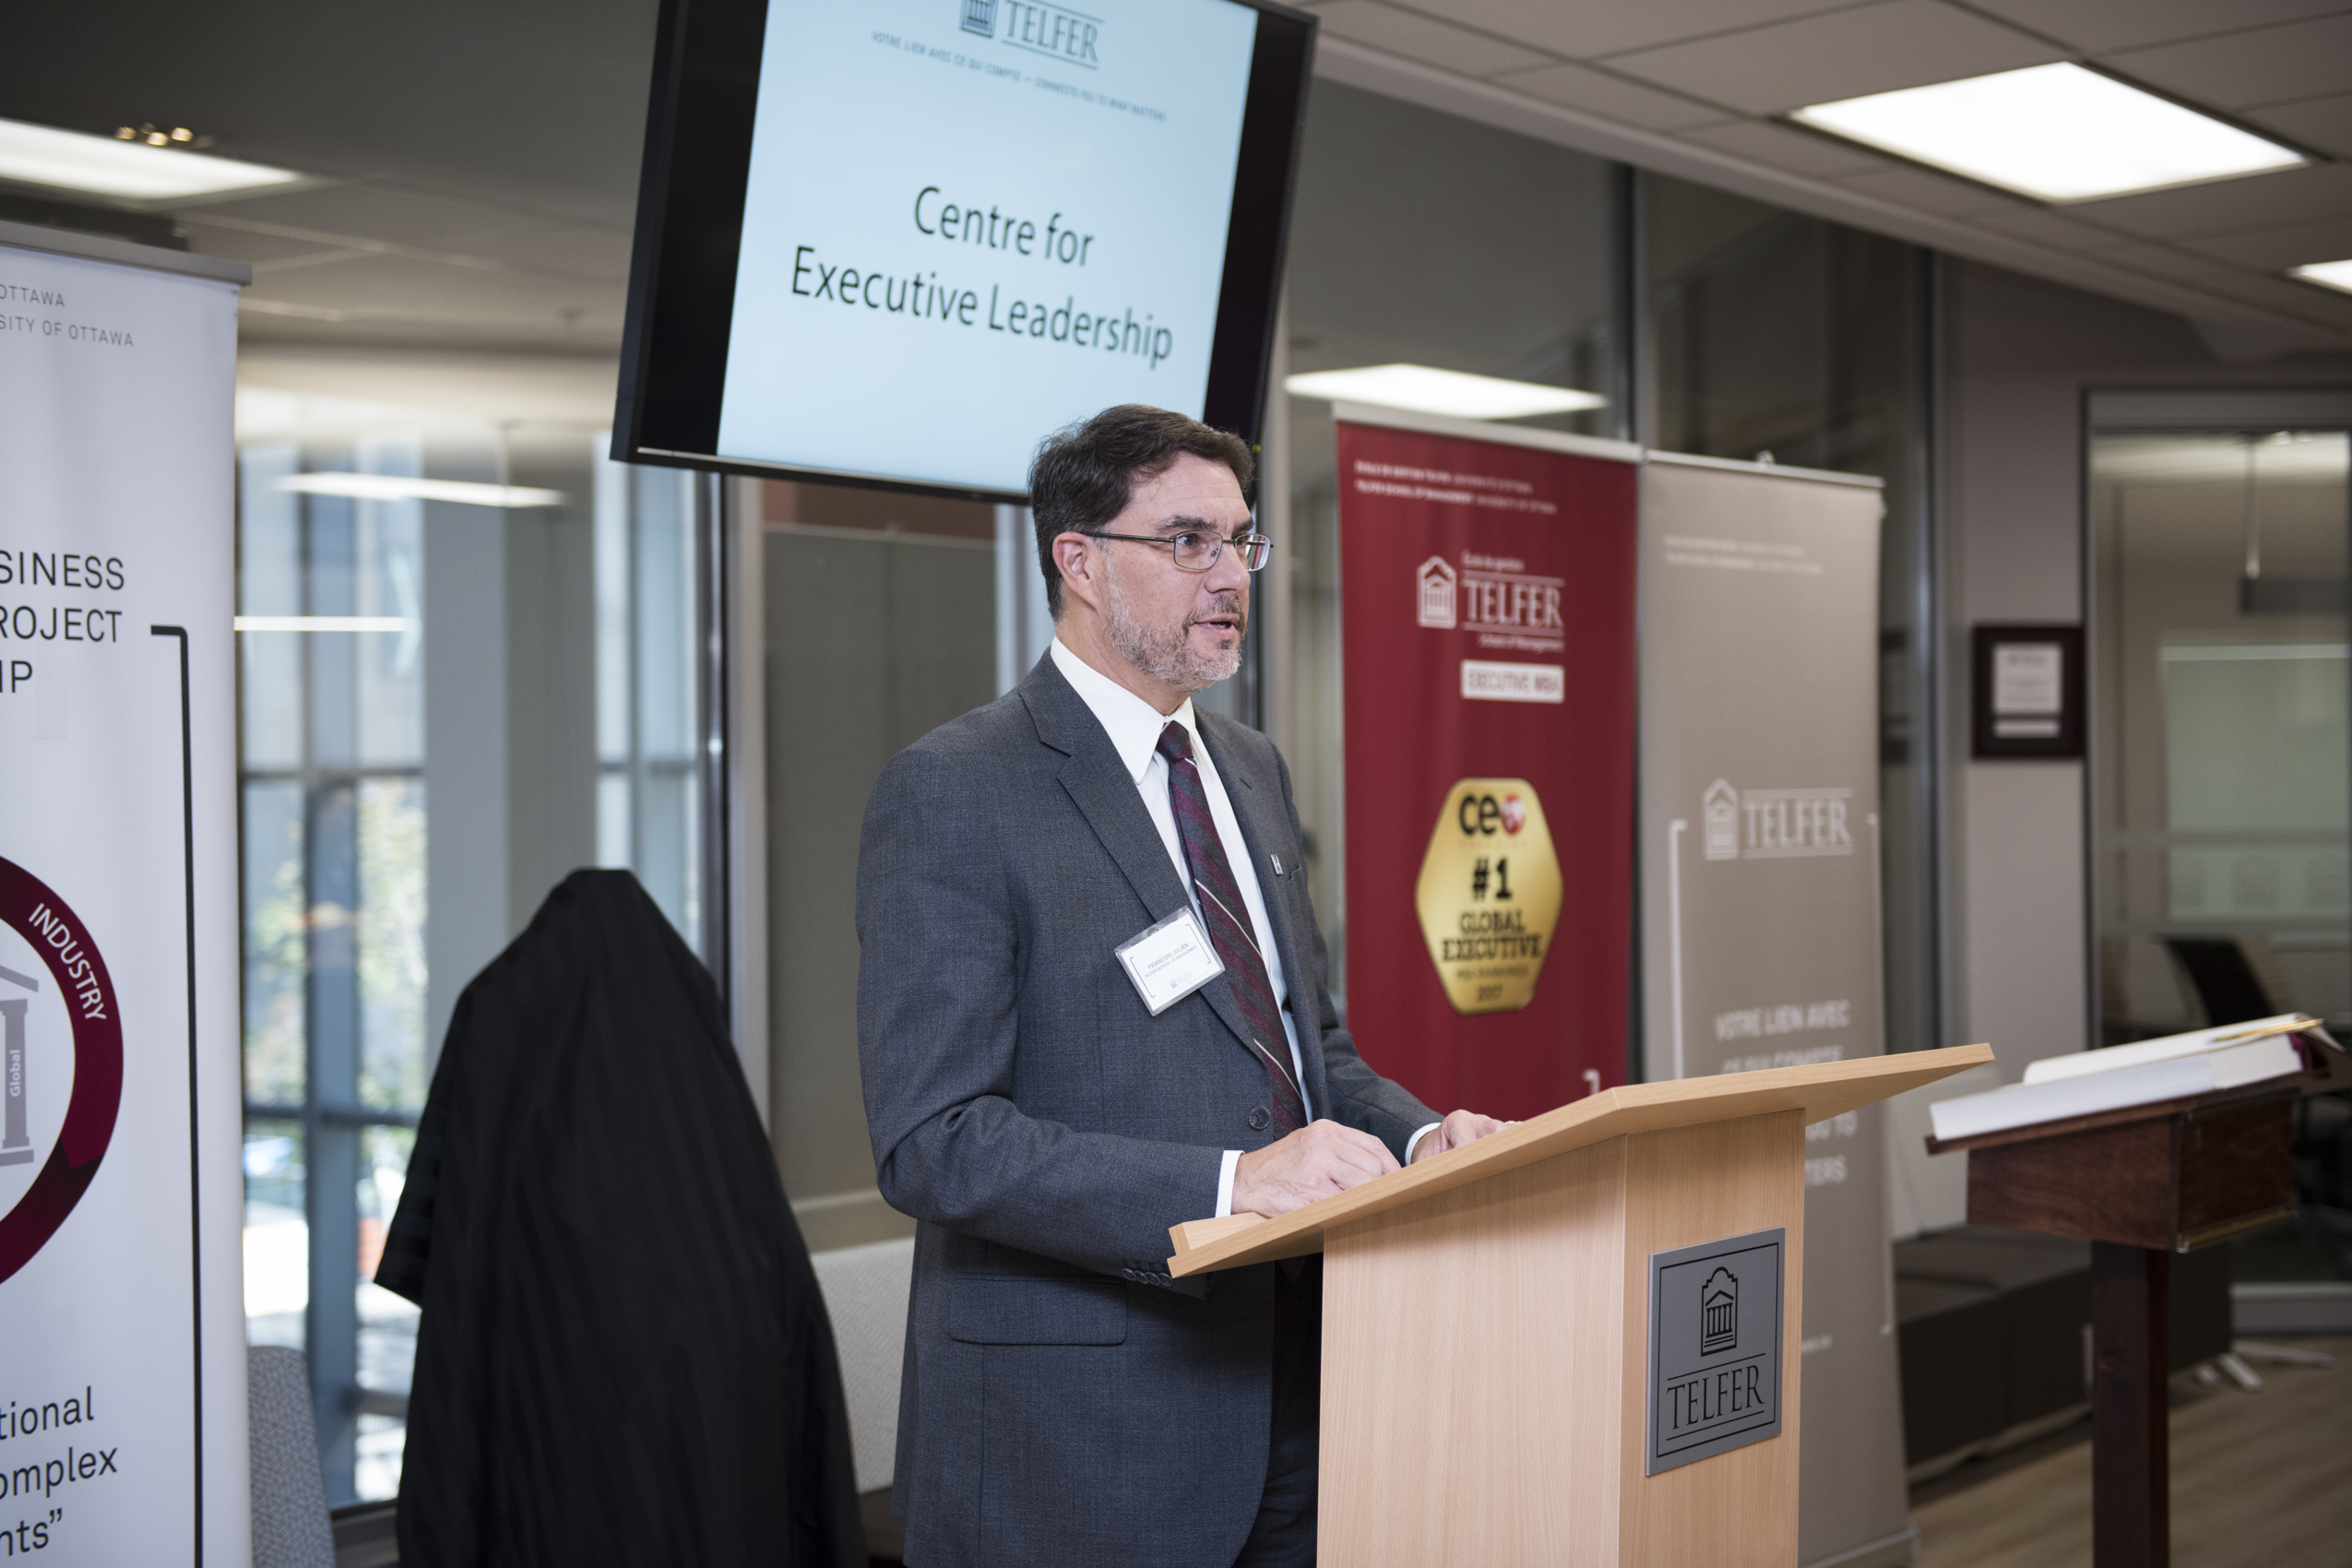  Centre for Executive Leadership Grand Opening